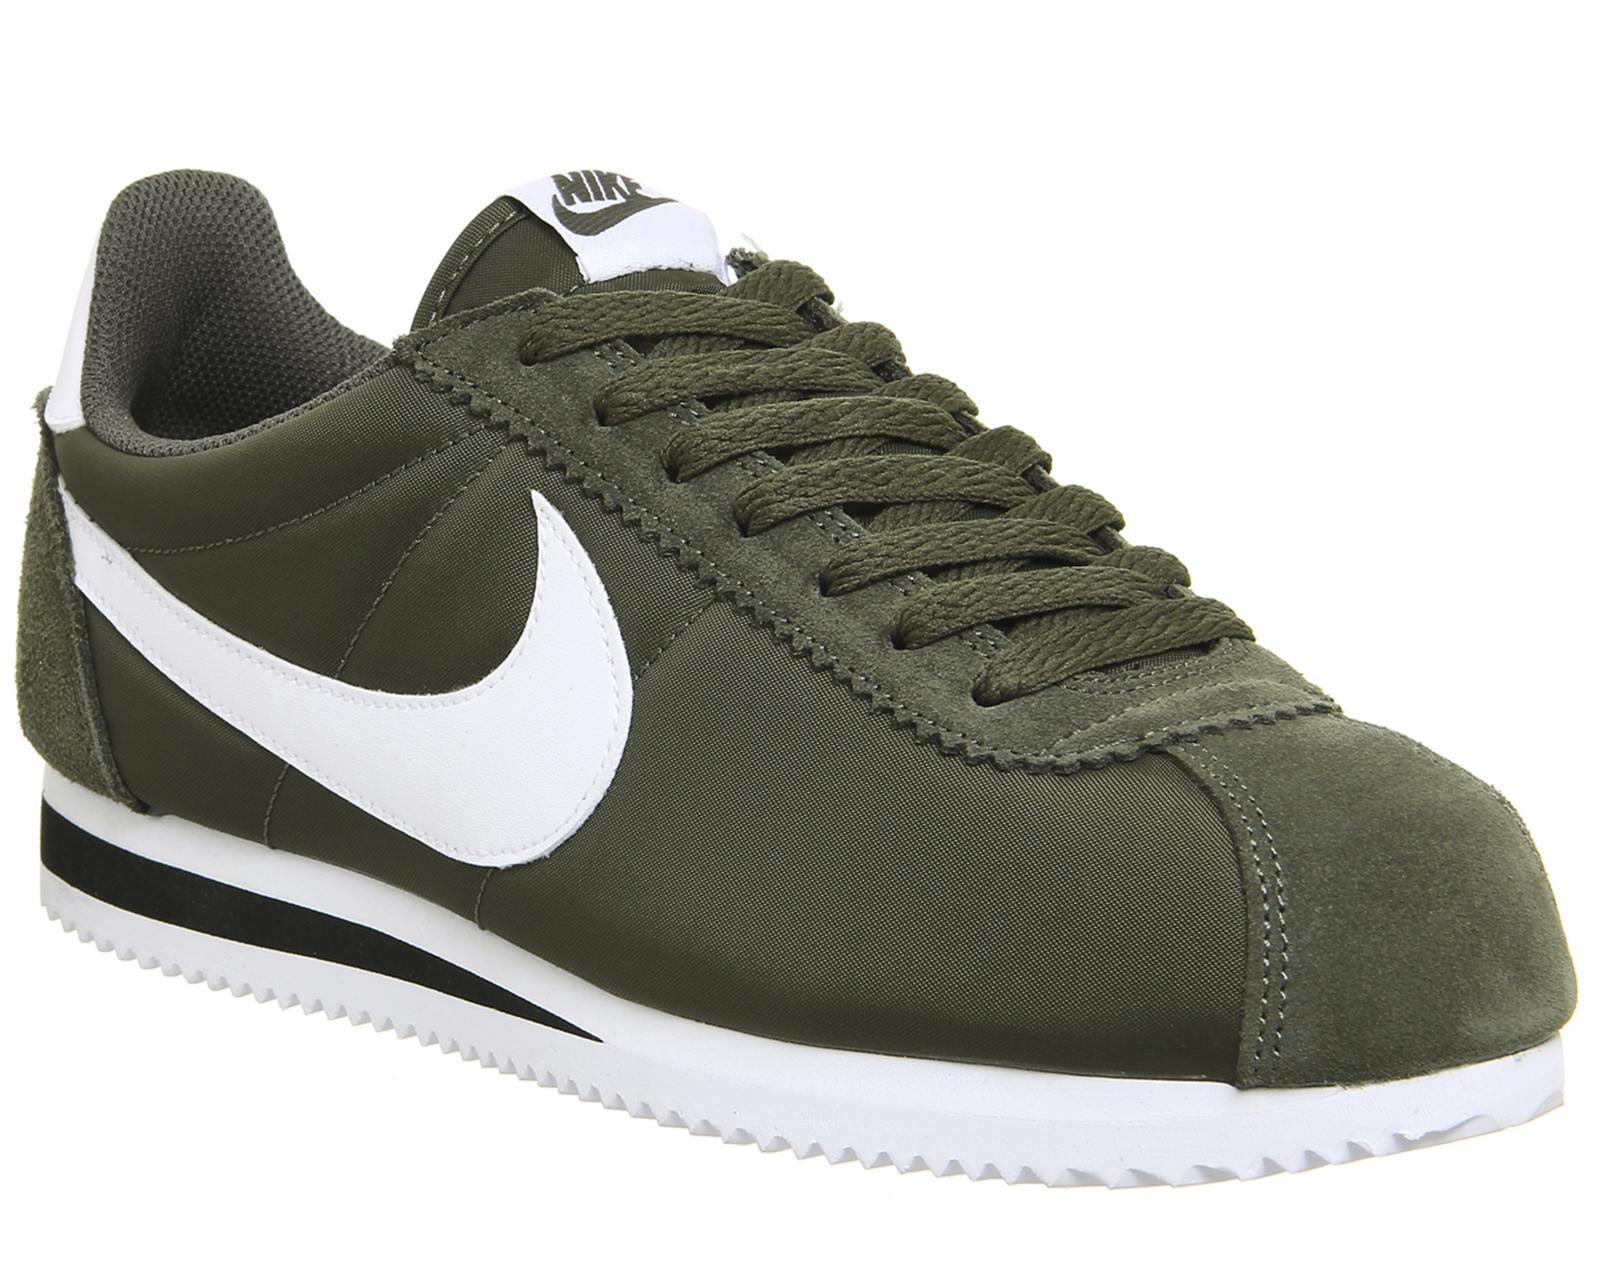 Nike Synthetic Cortez Nylon Trainers in 